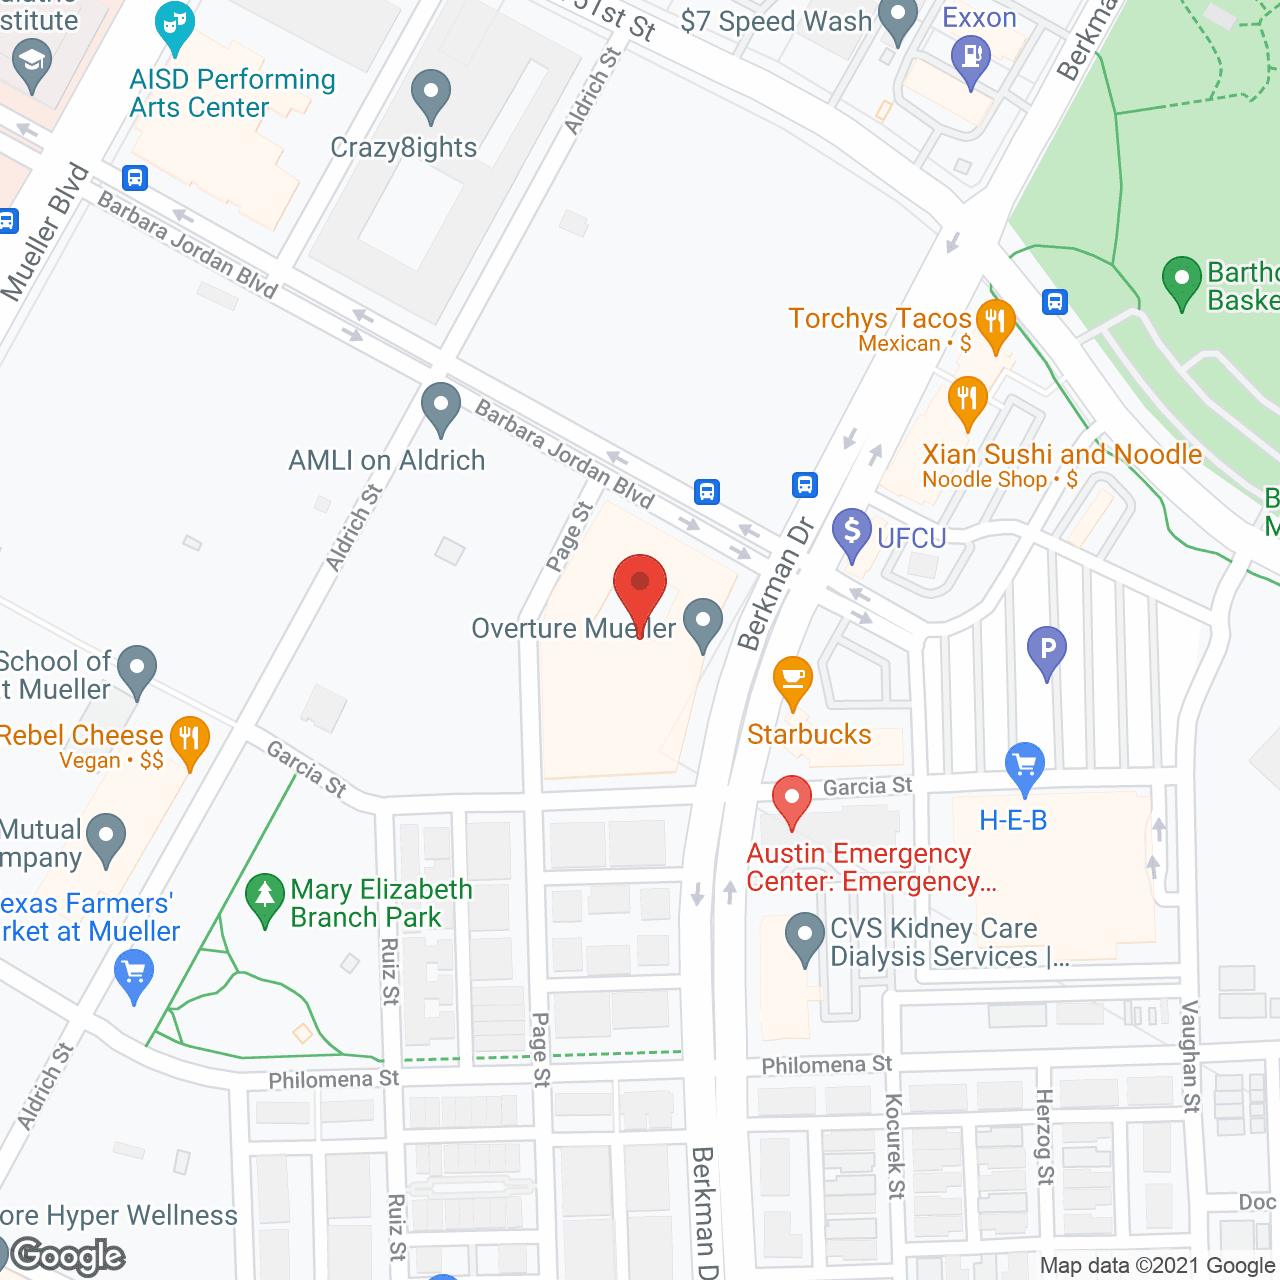 Overture Mueller 55+ Apartment Homes in google map